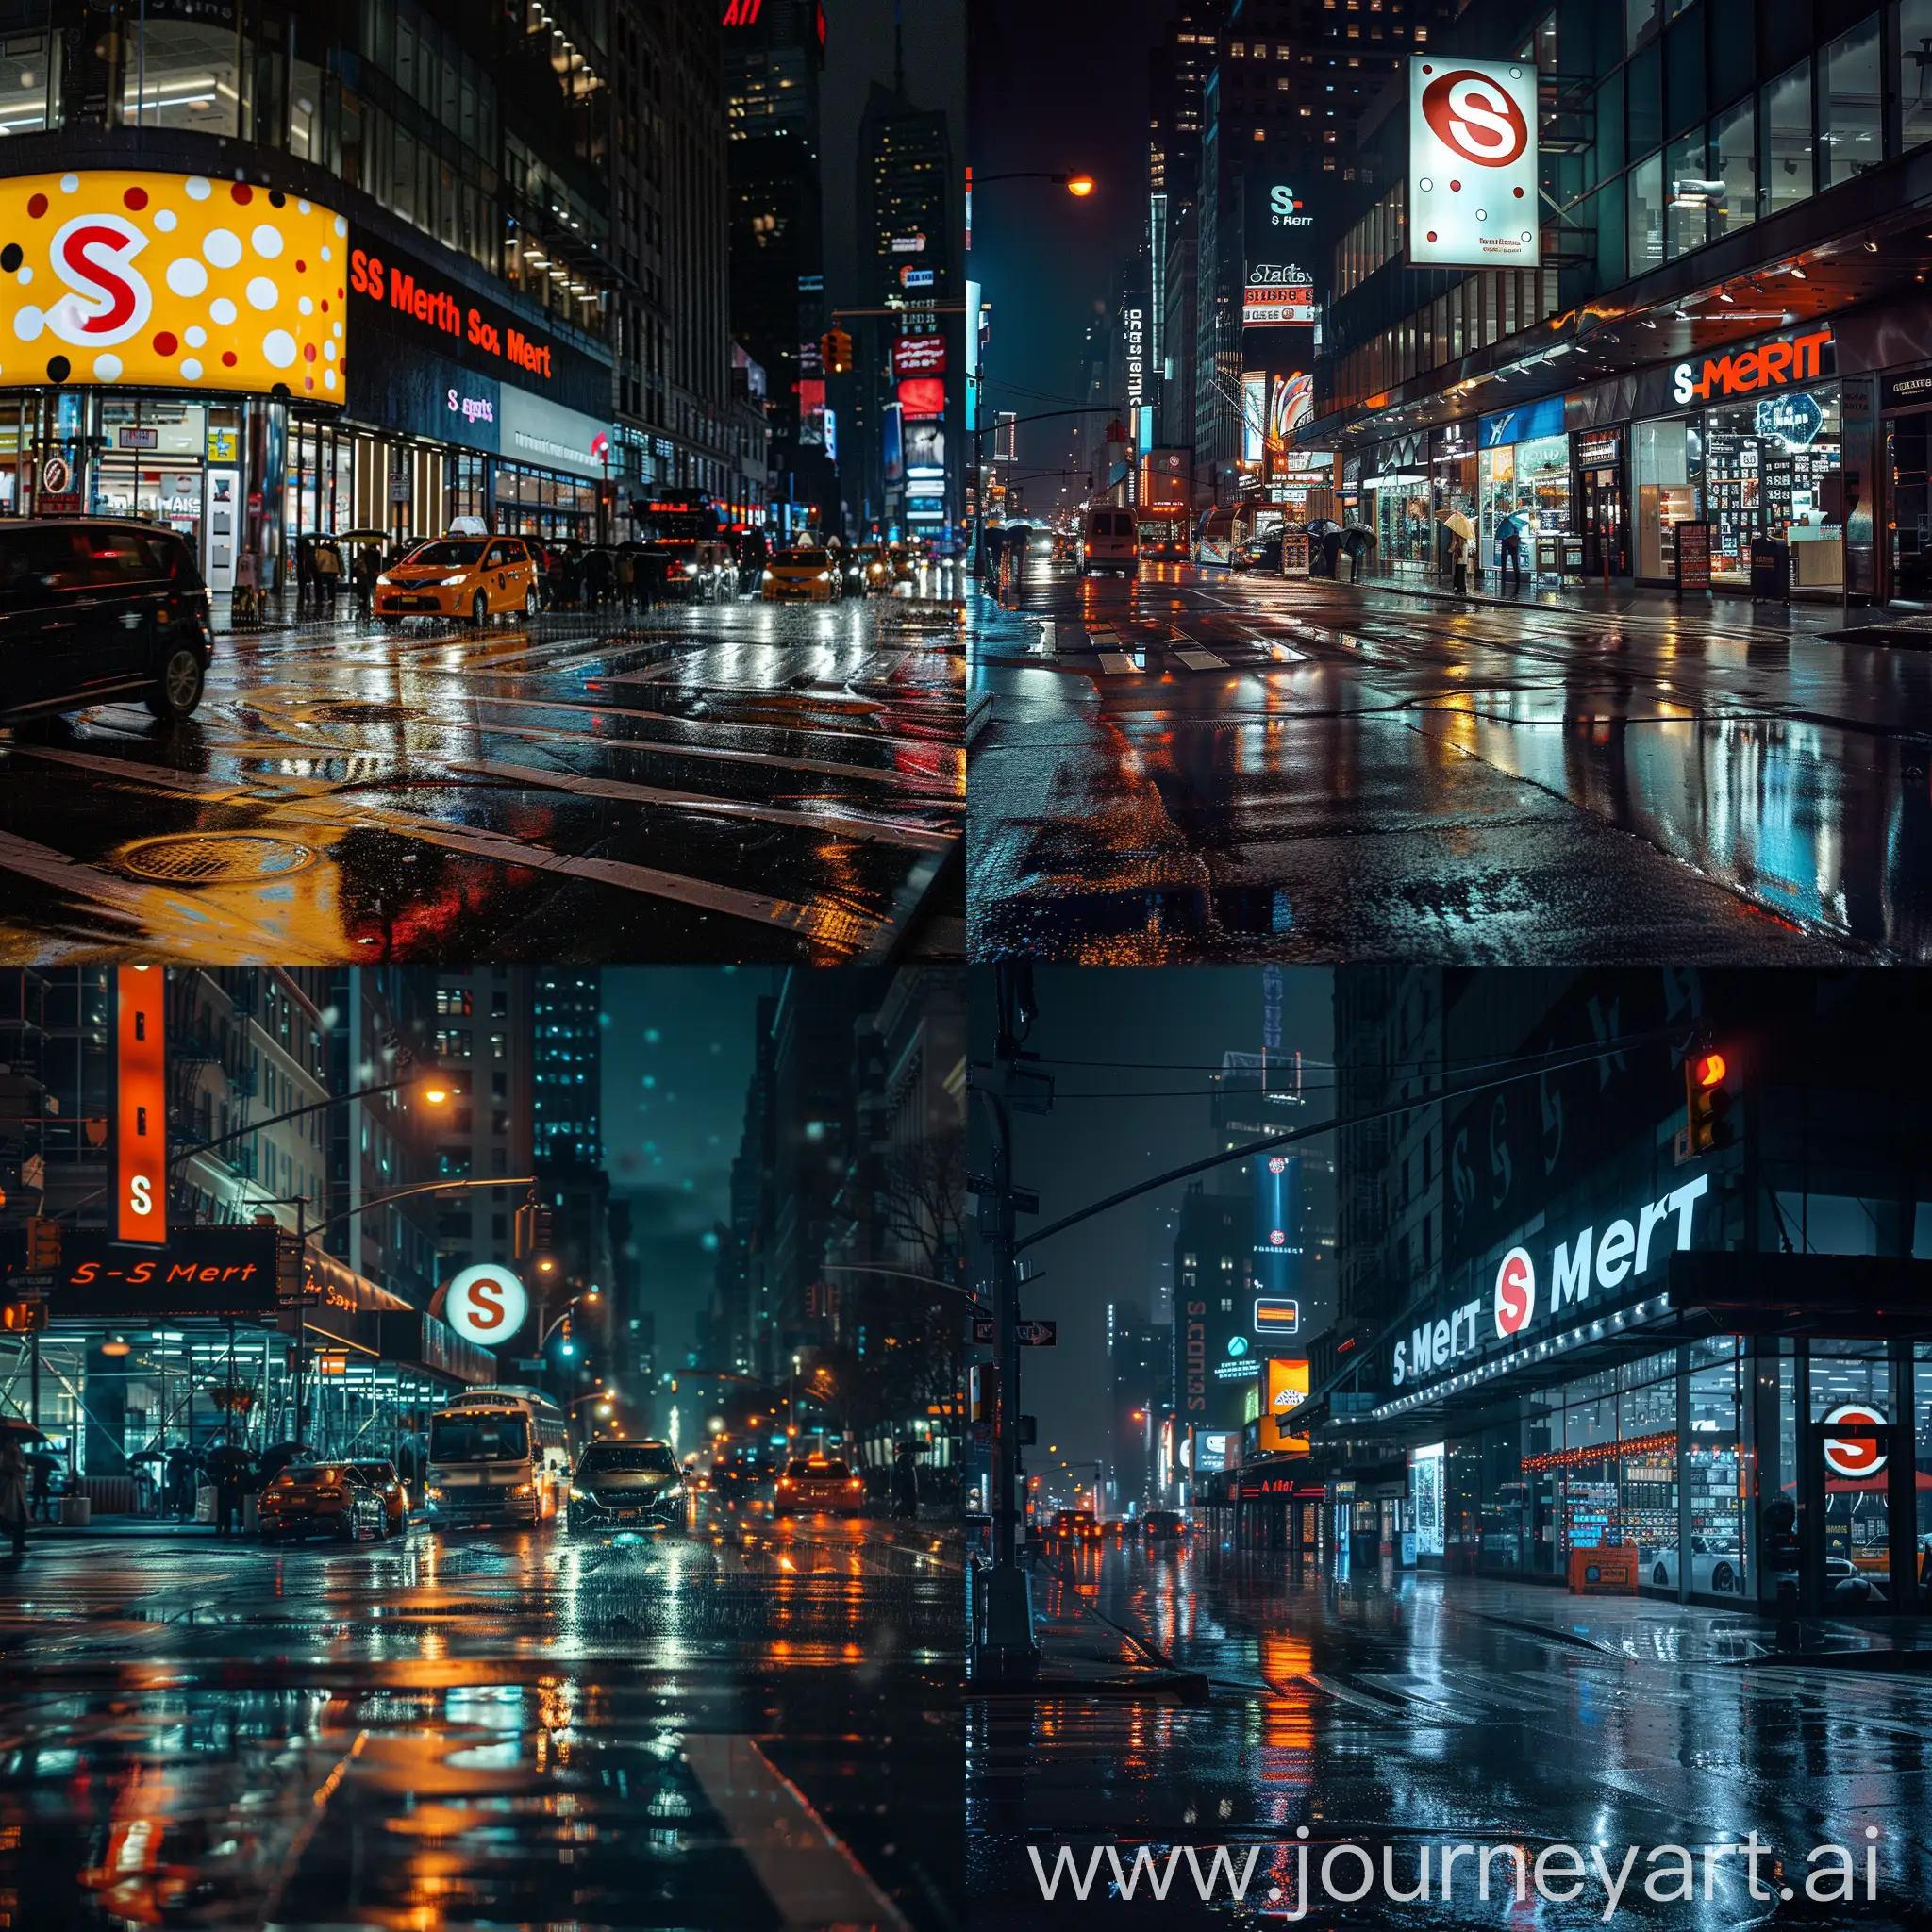 Rainy-Night-in-New-York-Featuring-SMart-Technology-Store